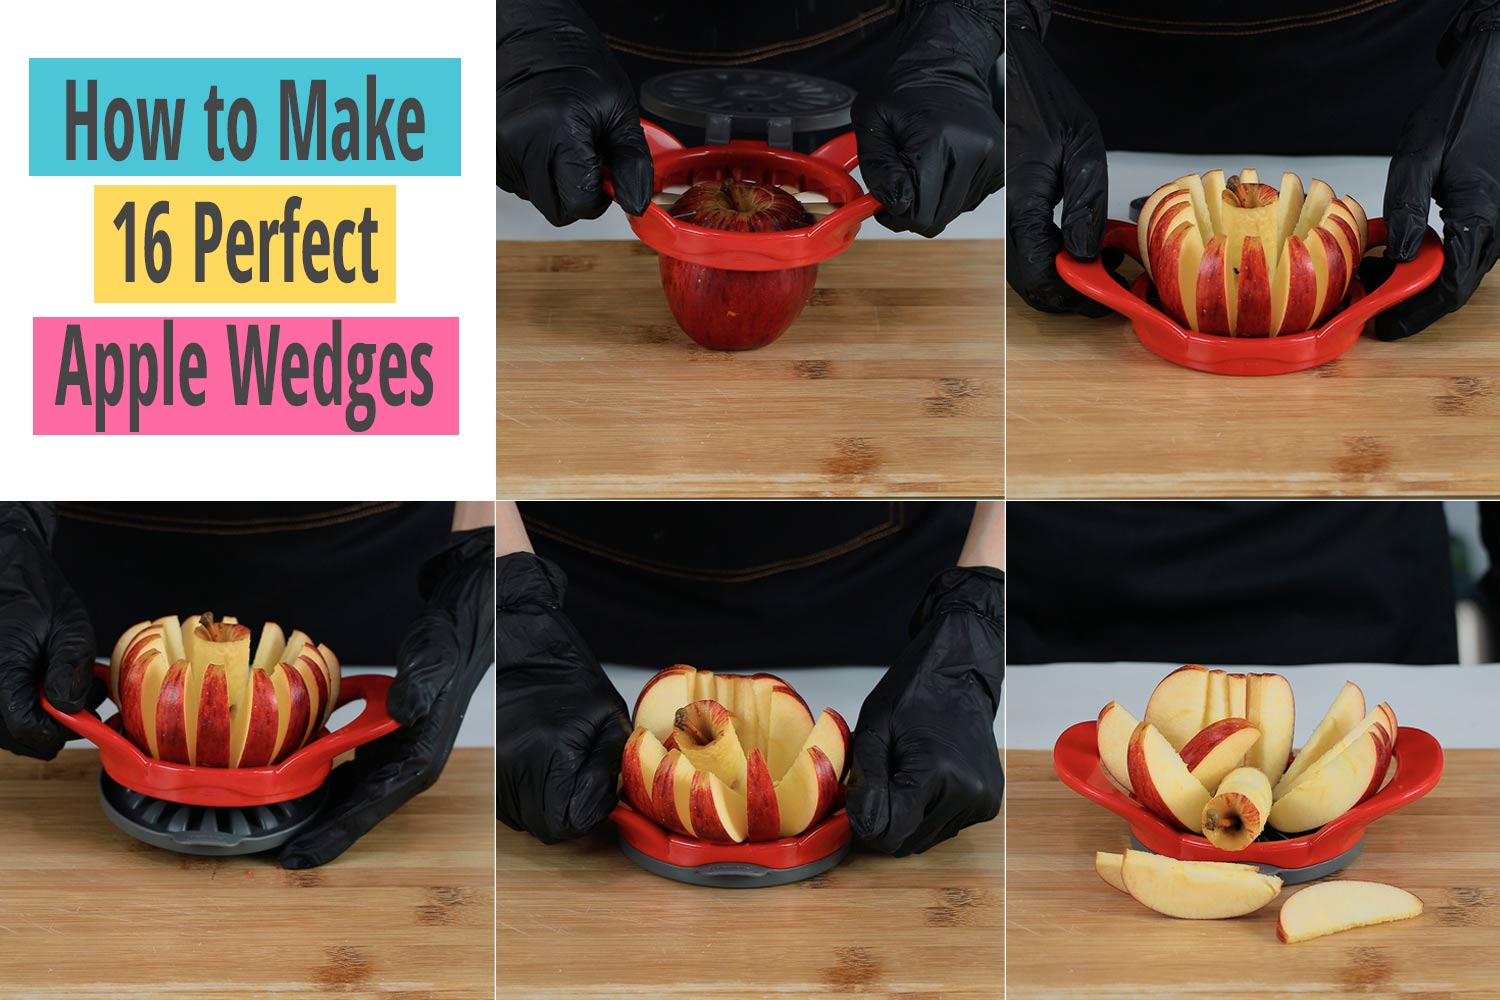 Steps to cut an apple using the Prepworks apple wedger